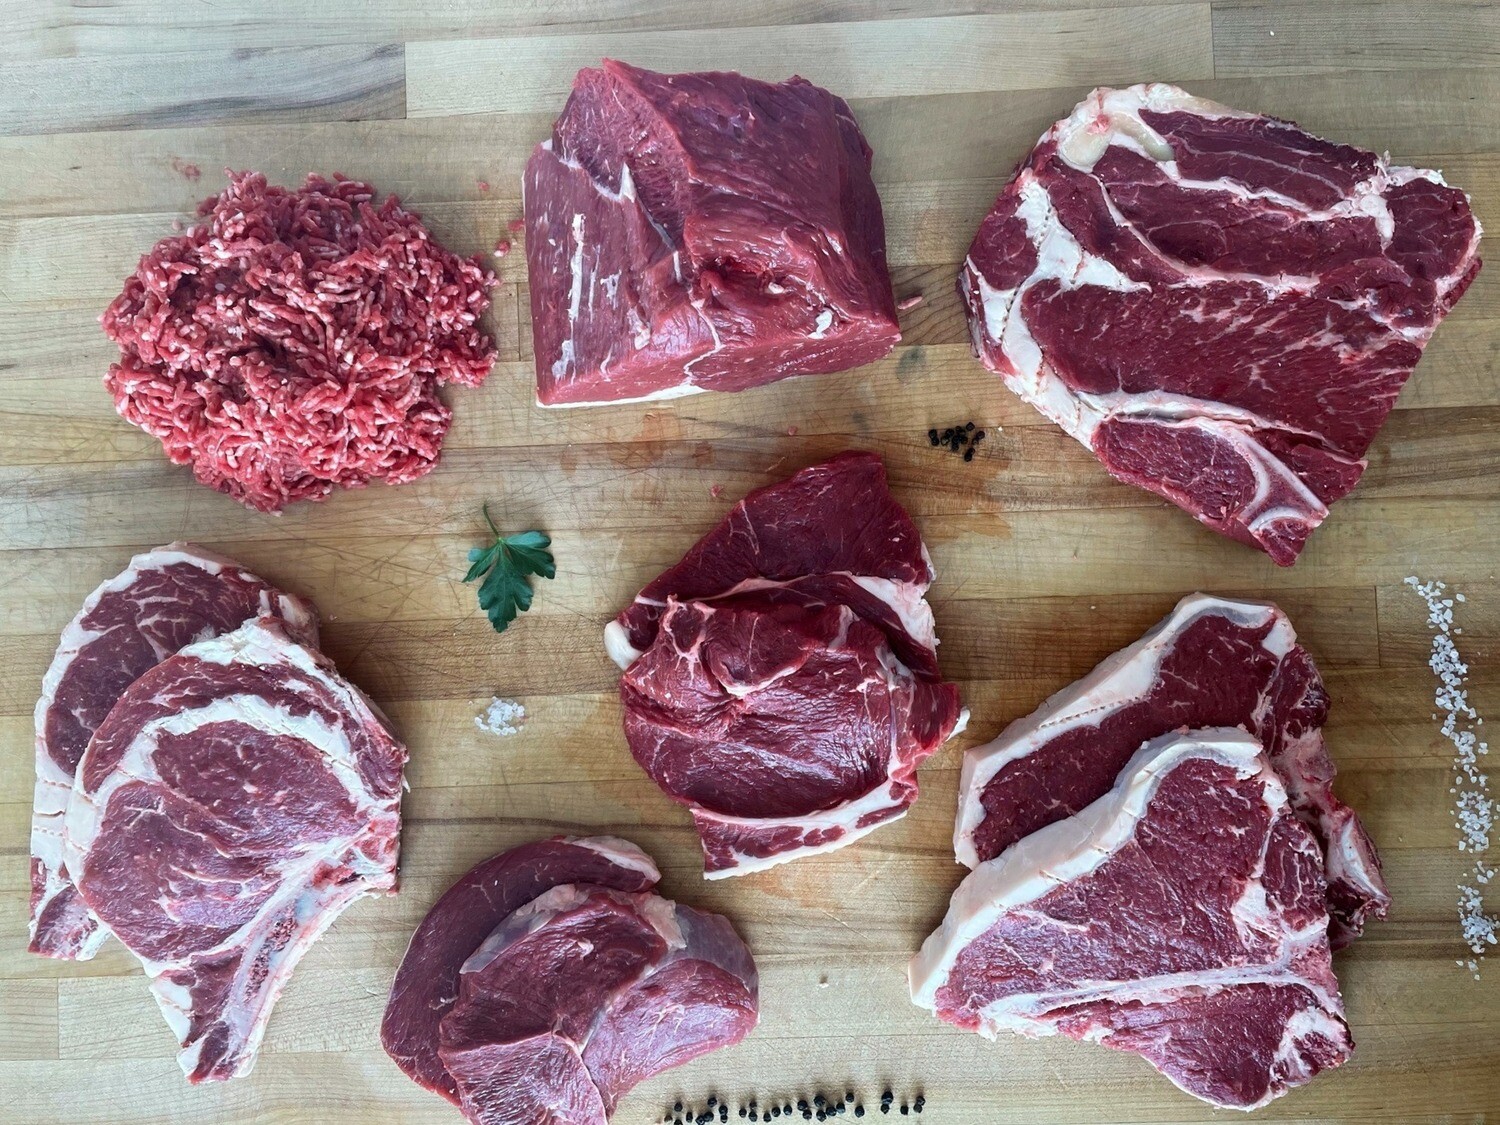 BEEF COMBO BOX - Approx. $270-$280